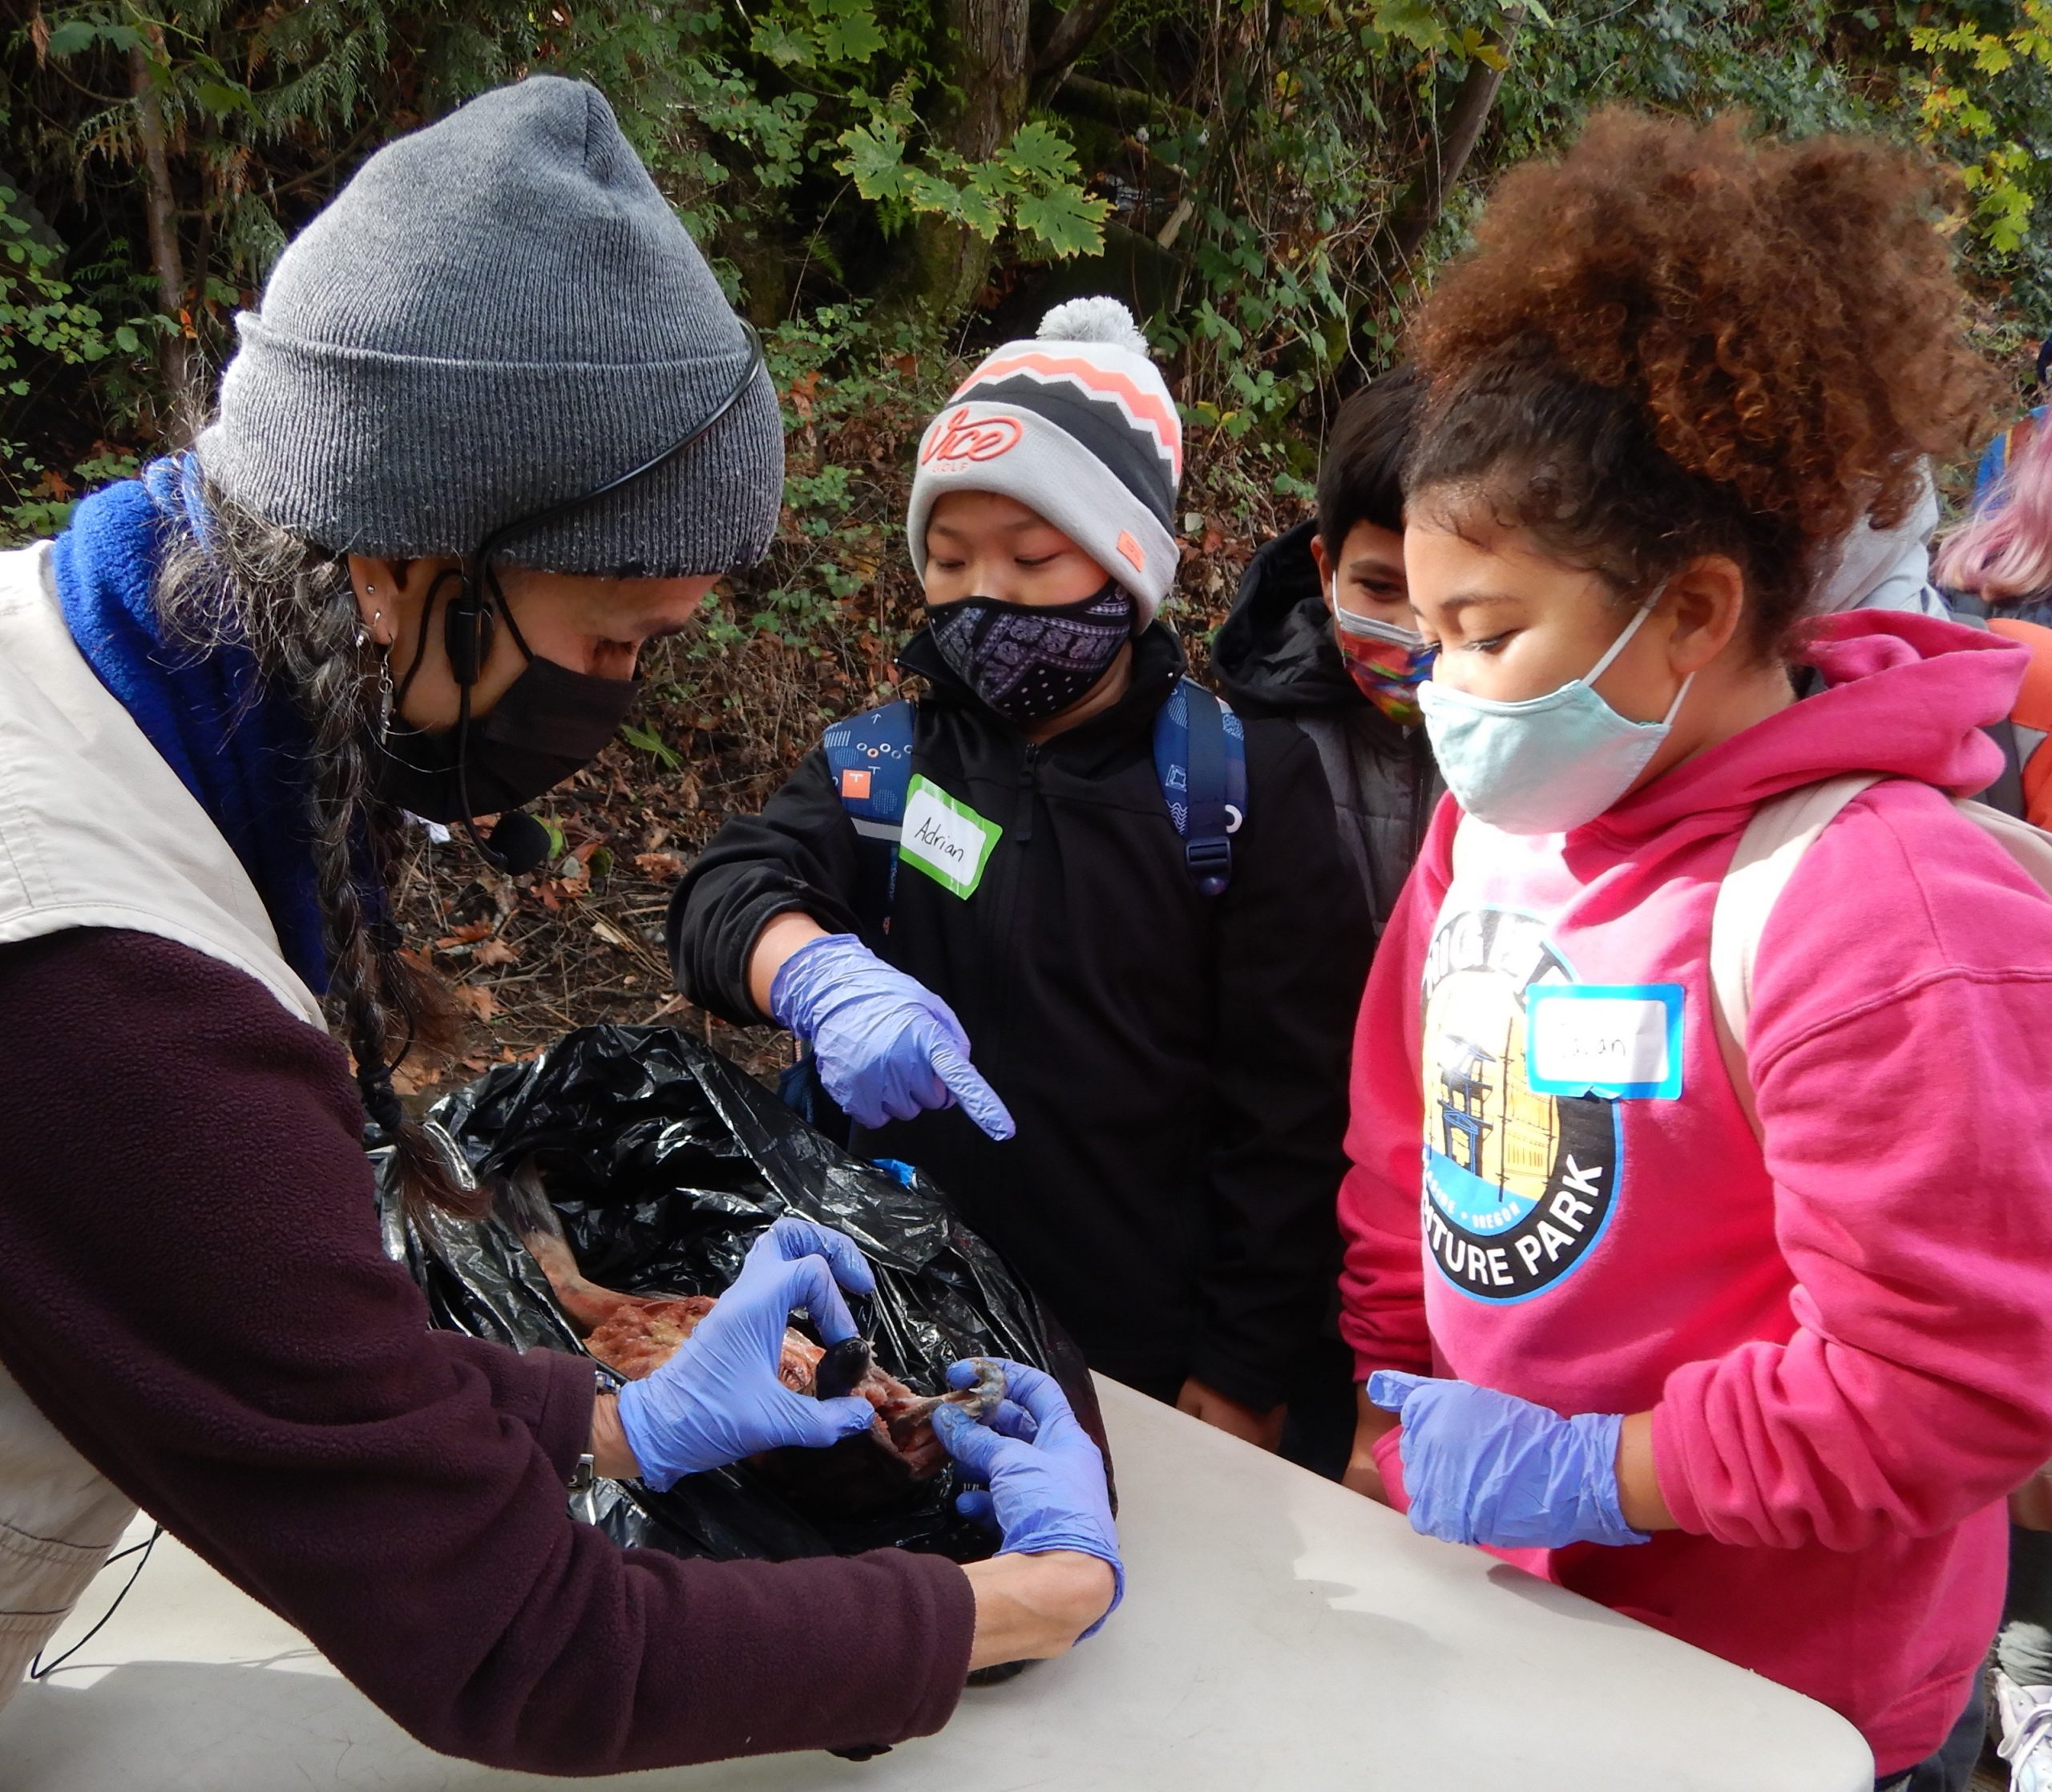 This image shows a typical naturalist interaction with a student. Naturalist Robin shows the mouth of a salmon carcass to a student. Robin has her hair in two braids, and wears a gray beanie and a black face mask. The student has curly brown hair, and is wearing a pink sweatshirt and a white face mask.